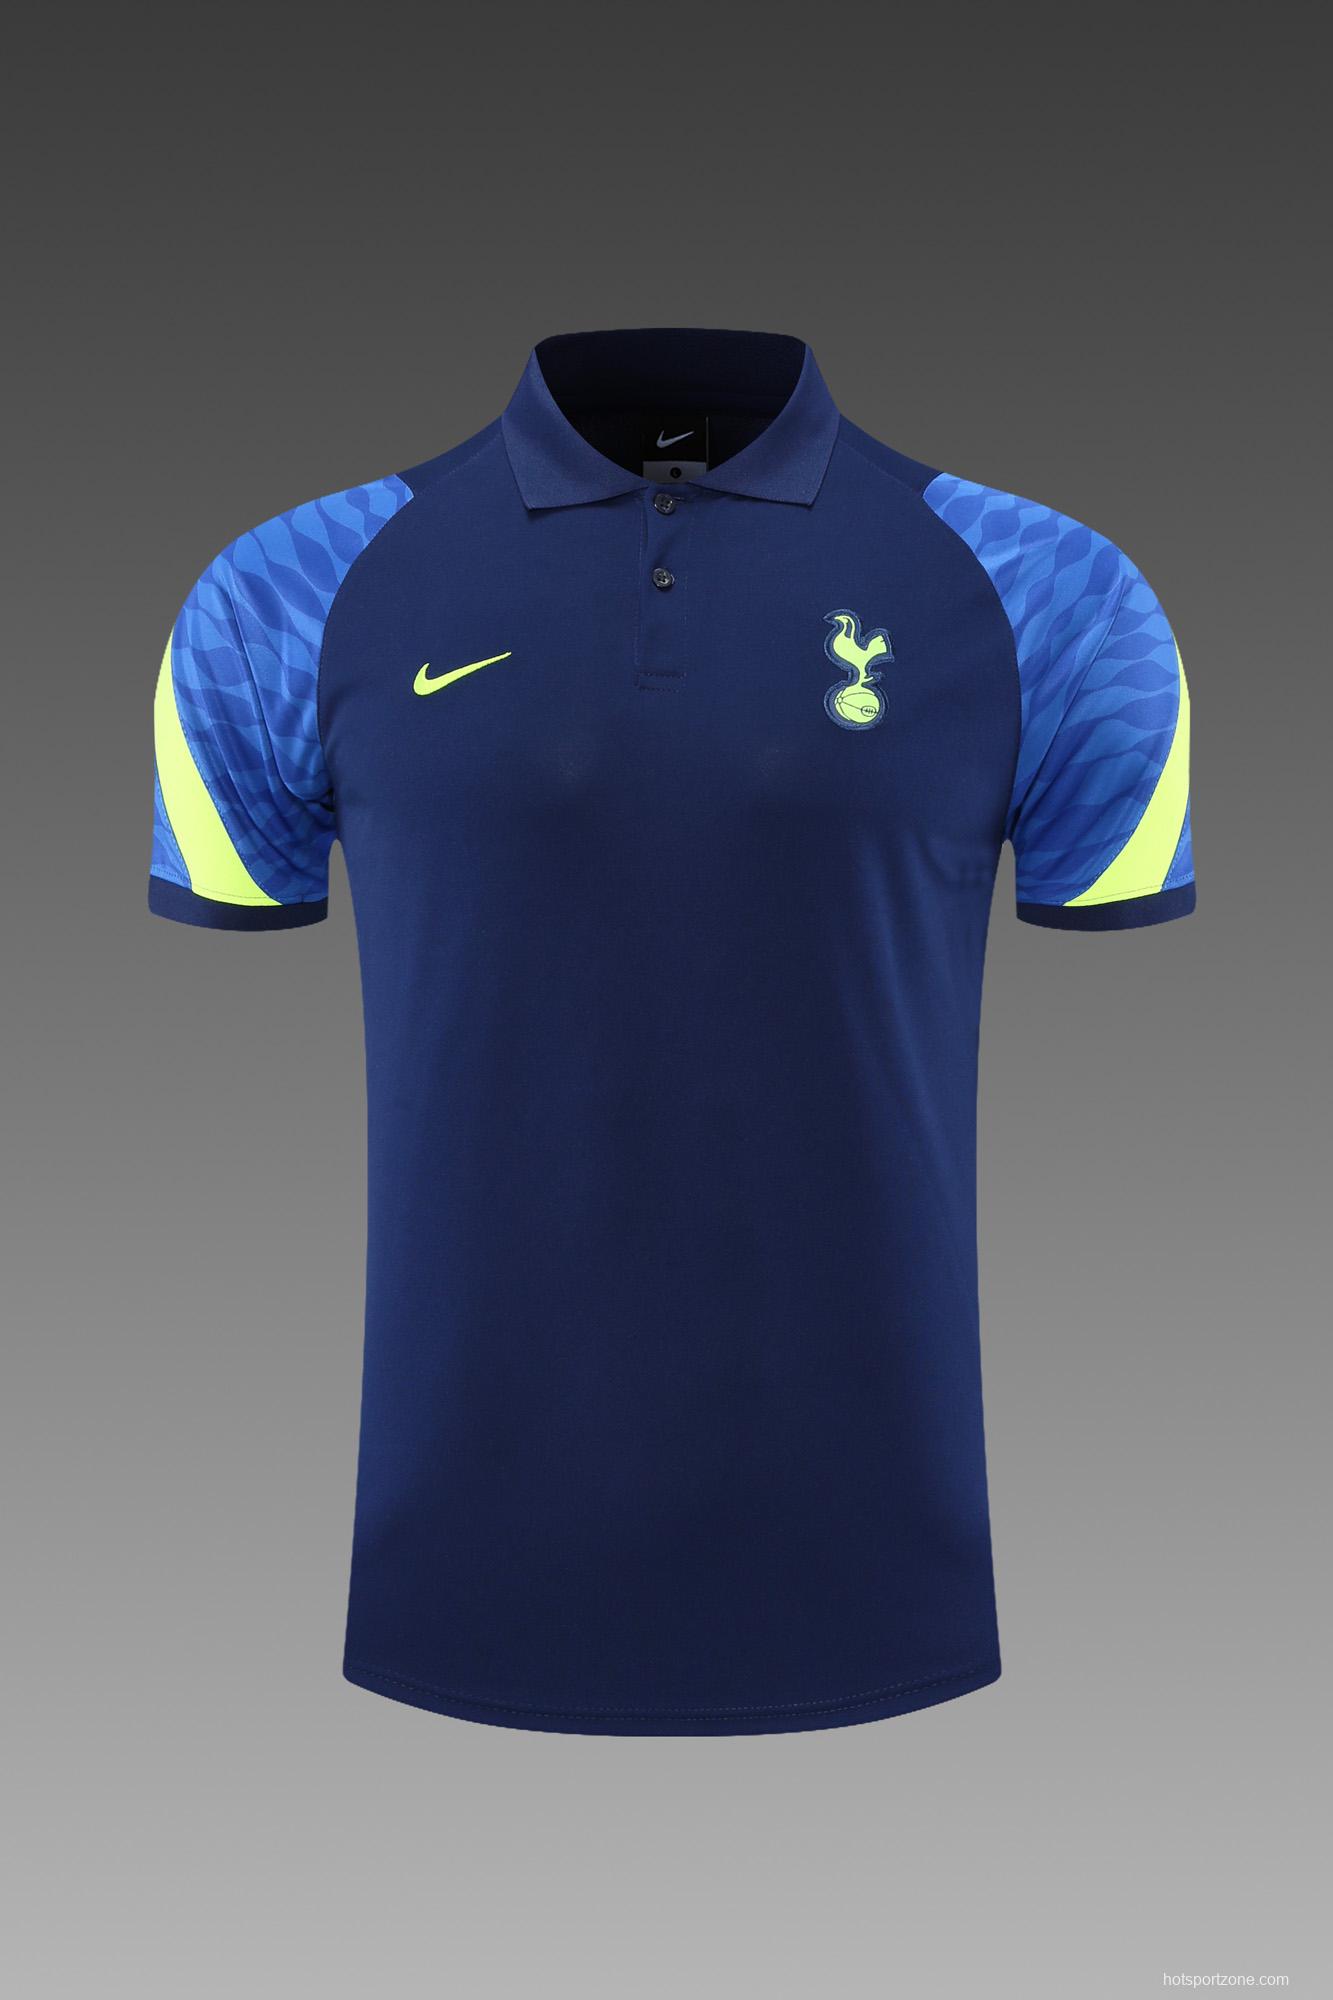 Tottenham Hotspur POLO kit Dark Blue(not supported to be sold separately)